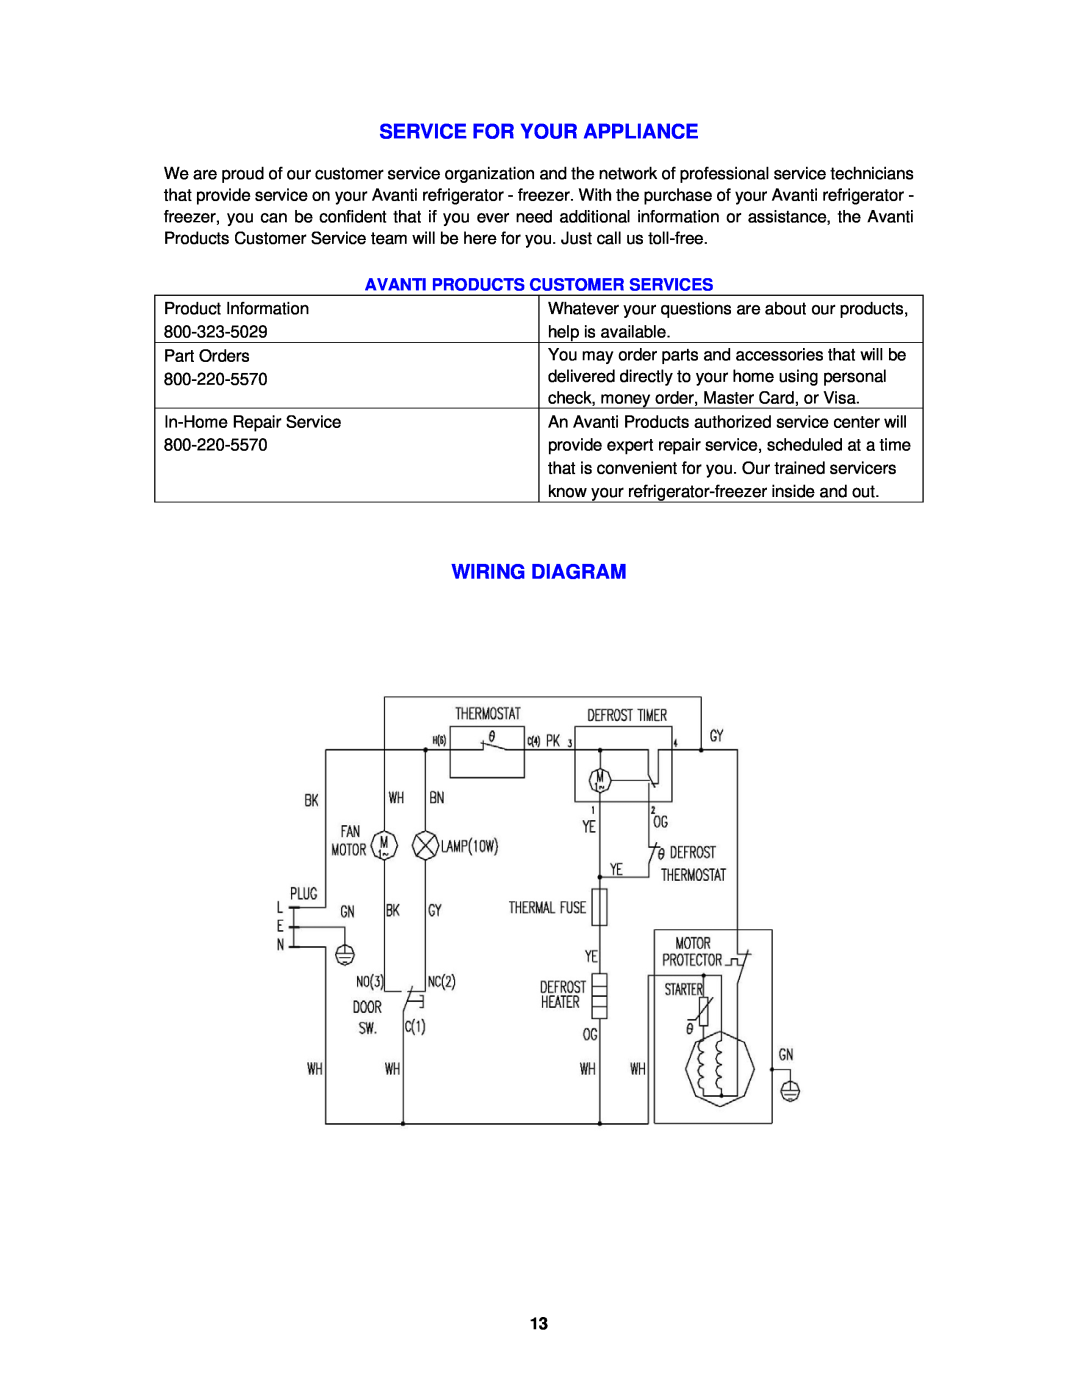 Avanti FF1009PS, FF1008W instruction manual Service For Your Appliance, Wiring Diagram, Avanti Products Customer Services 